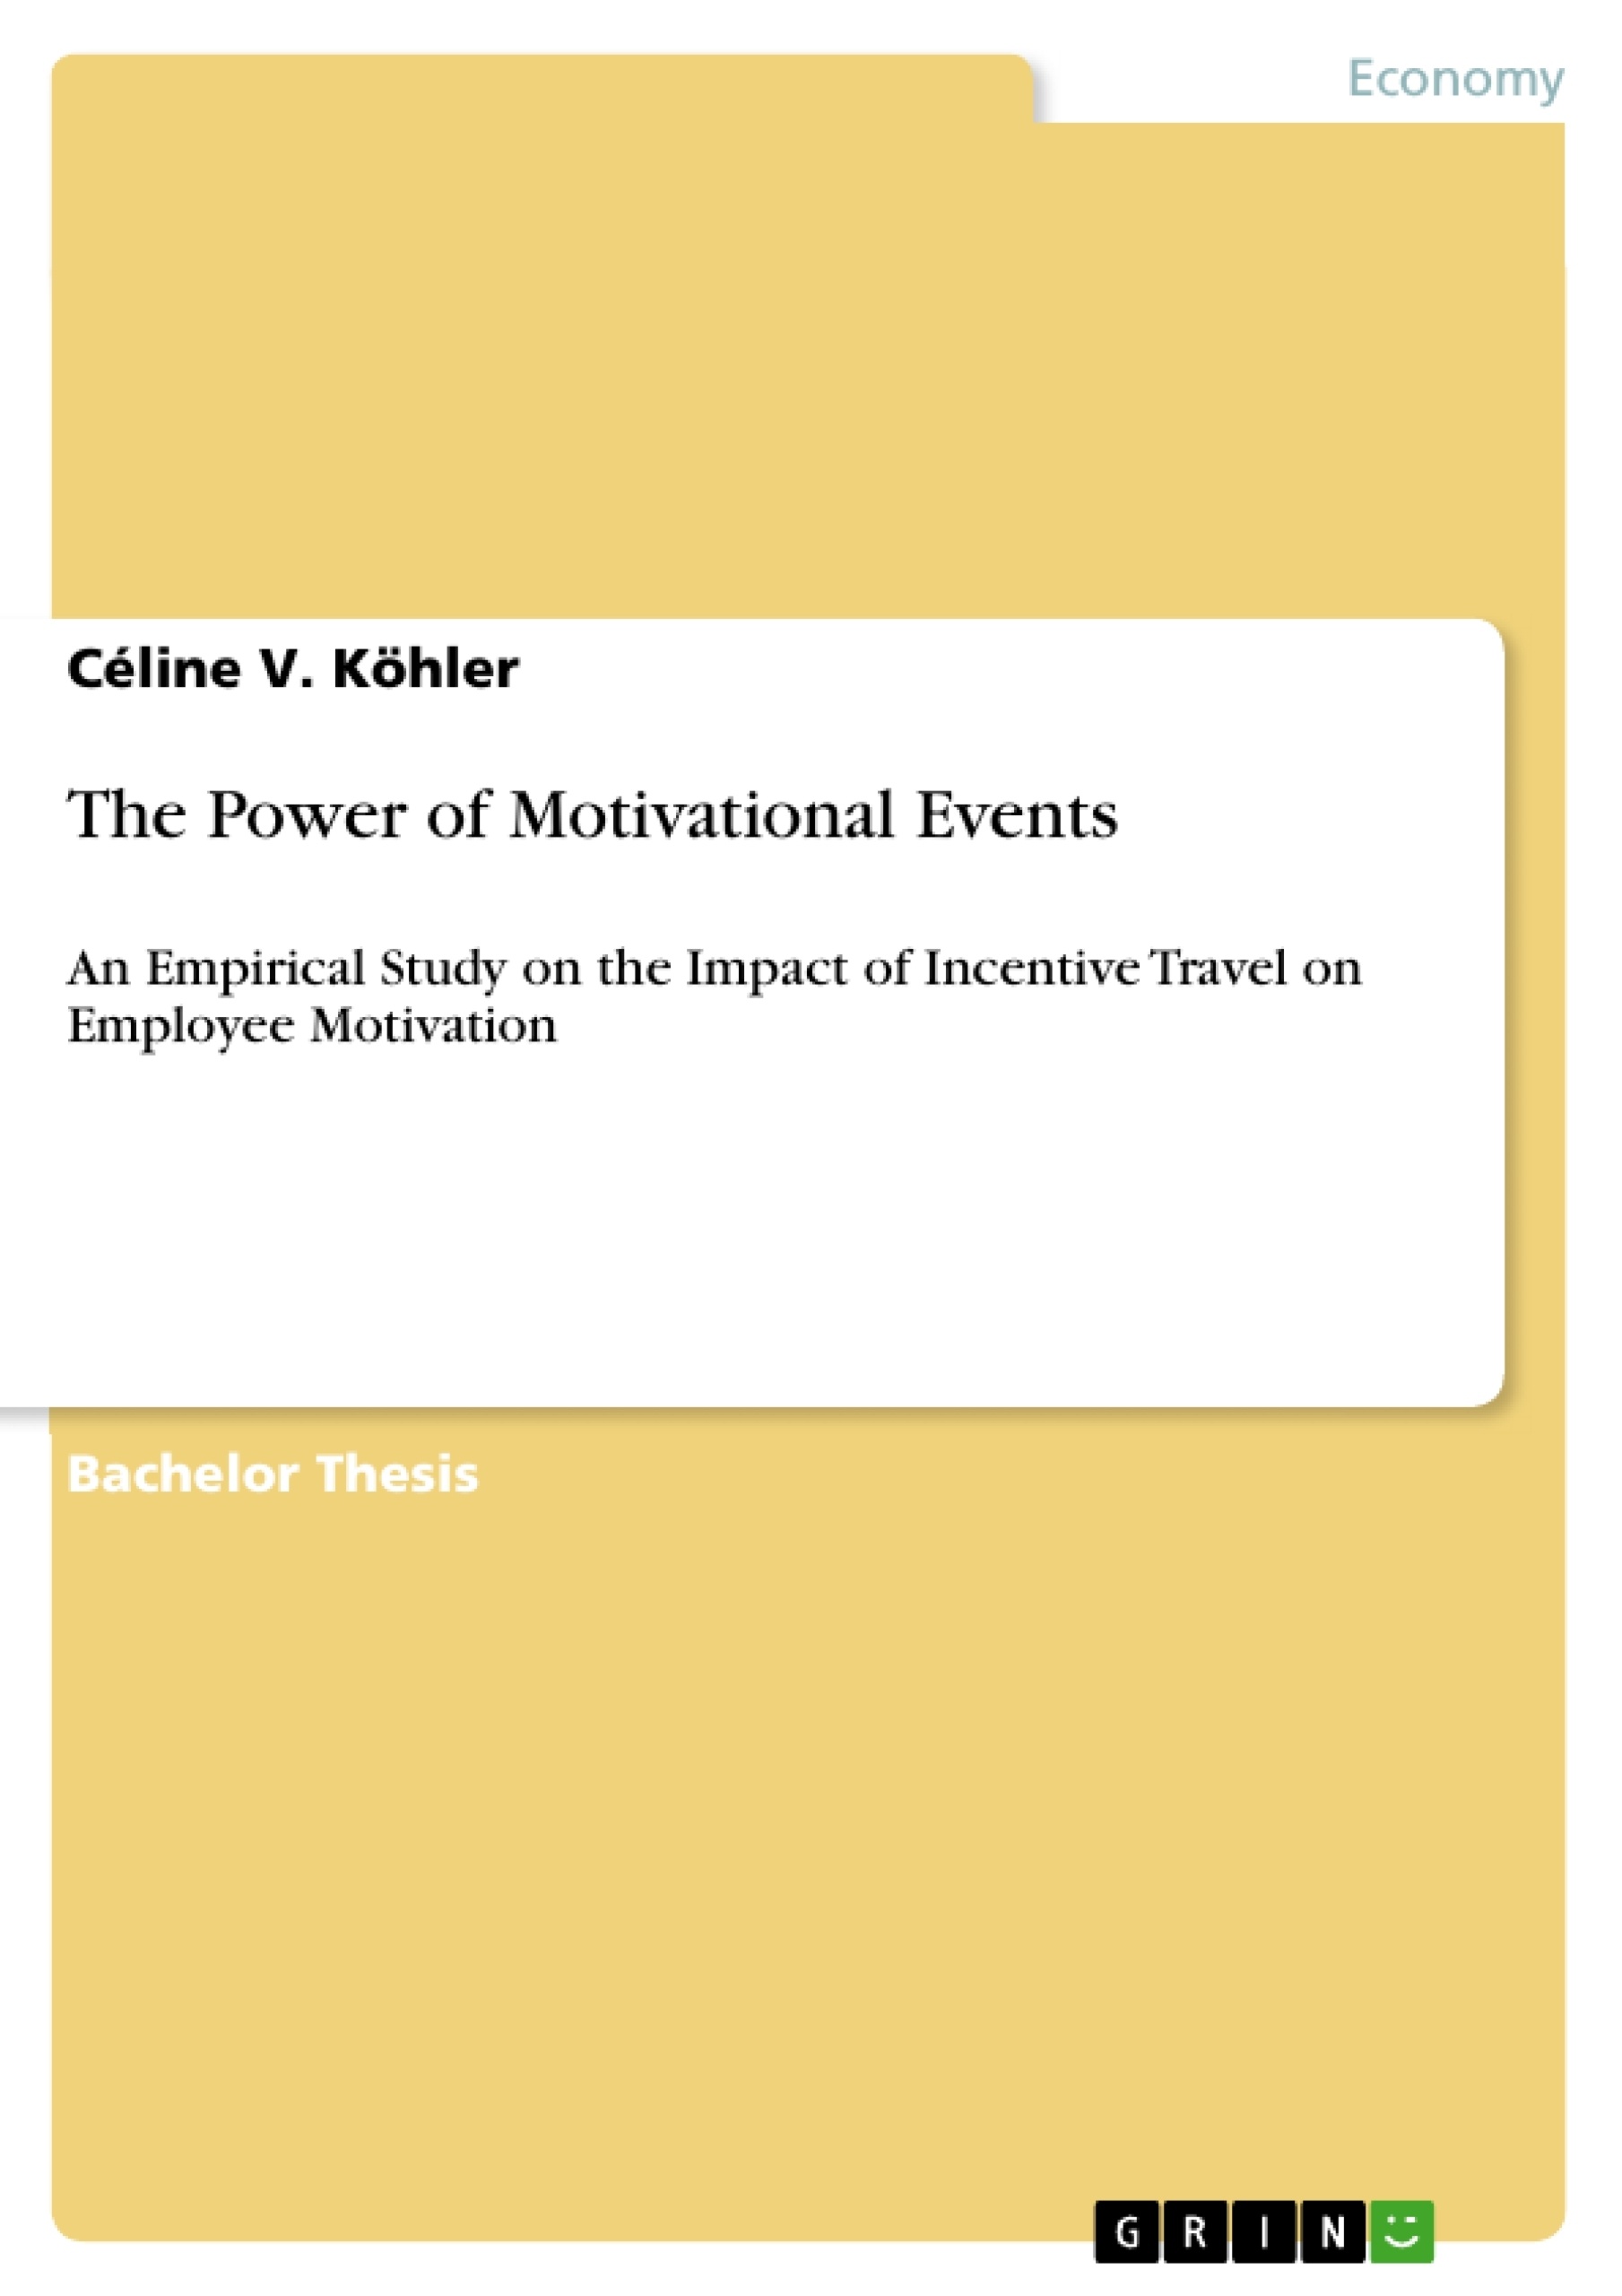 Title: The Power of Motivational Events